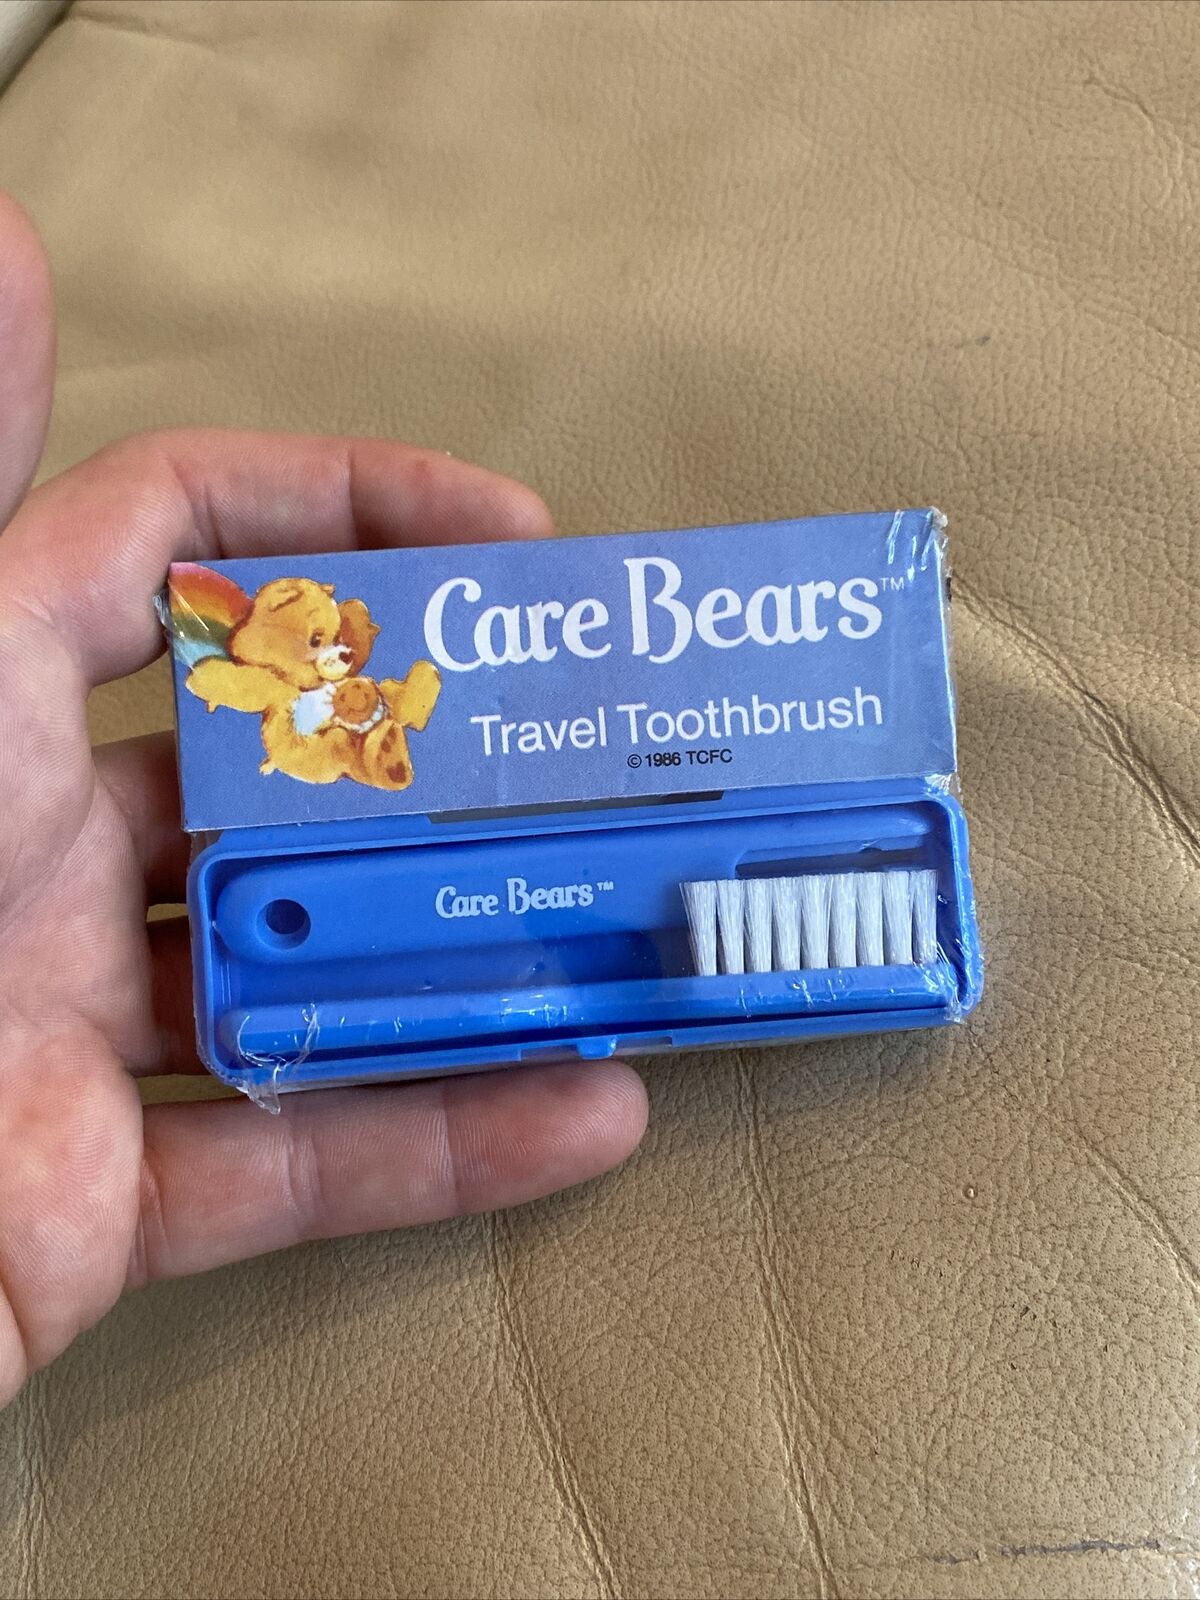 NEW CARE BEARS 2 PC TOOTHBRUSH w/ TRAVEL CASE 1986 COLLAPSIBLE PORTABLE VTG NOS